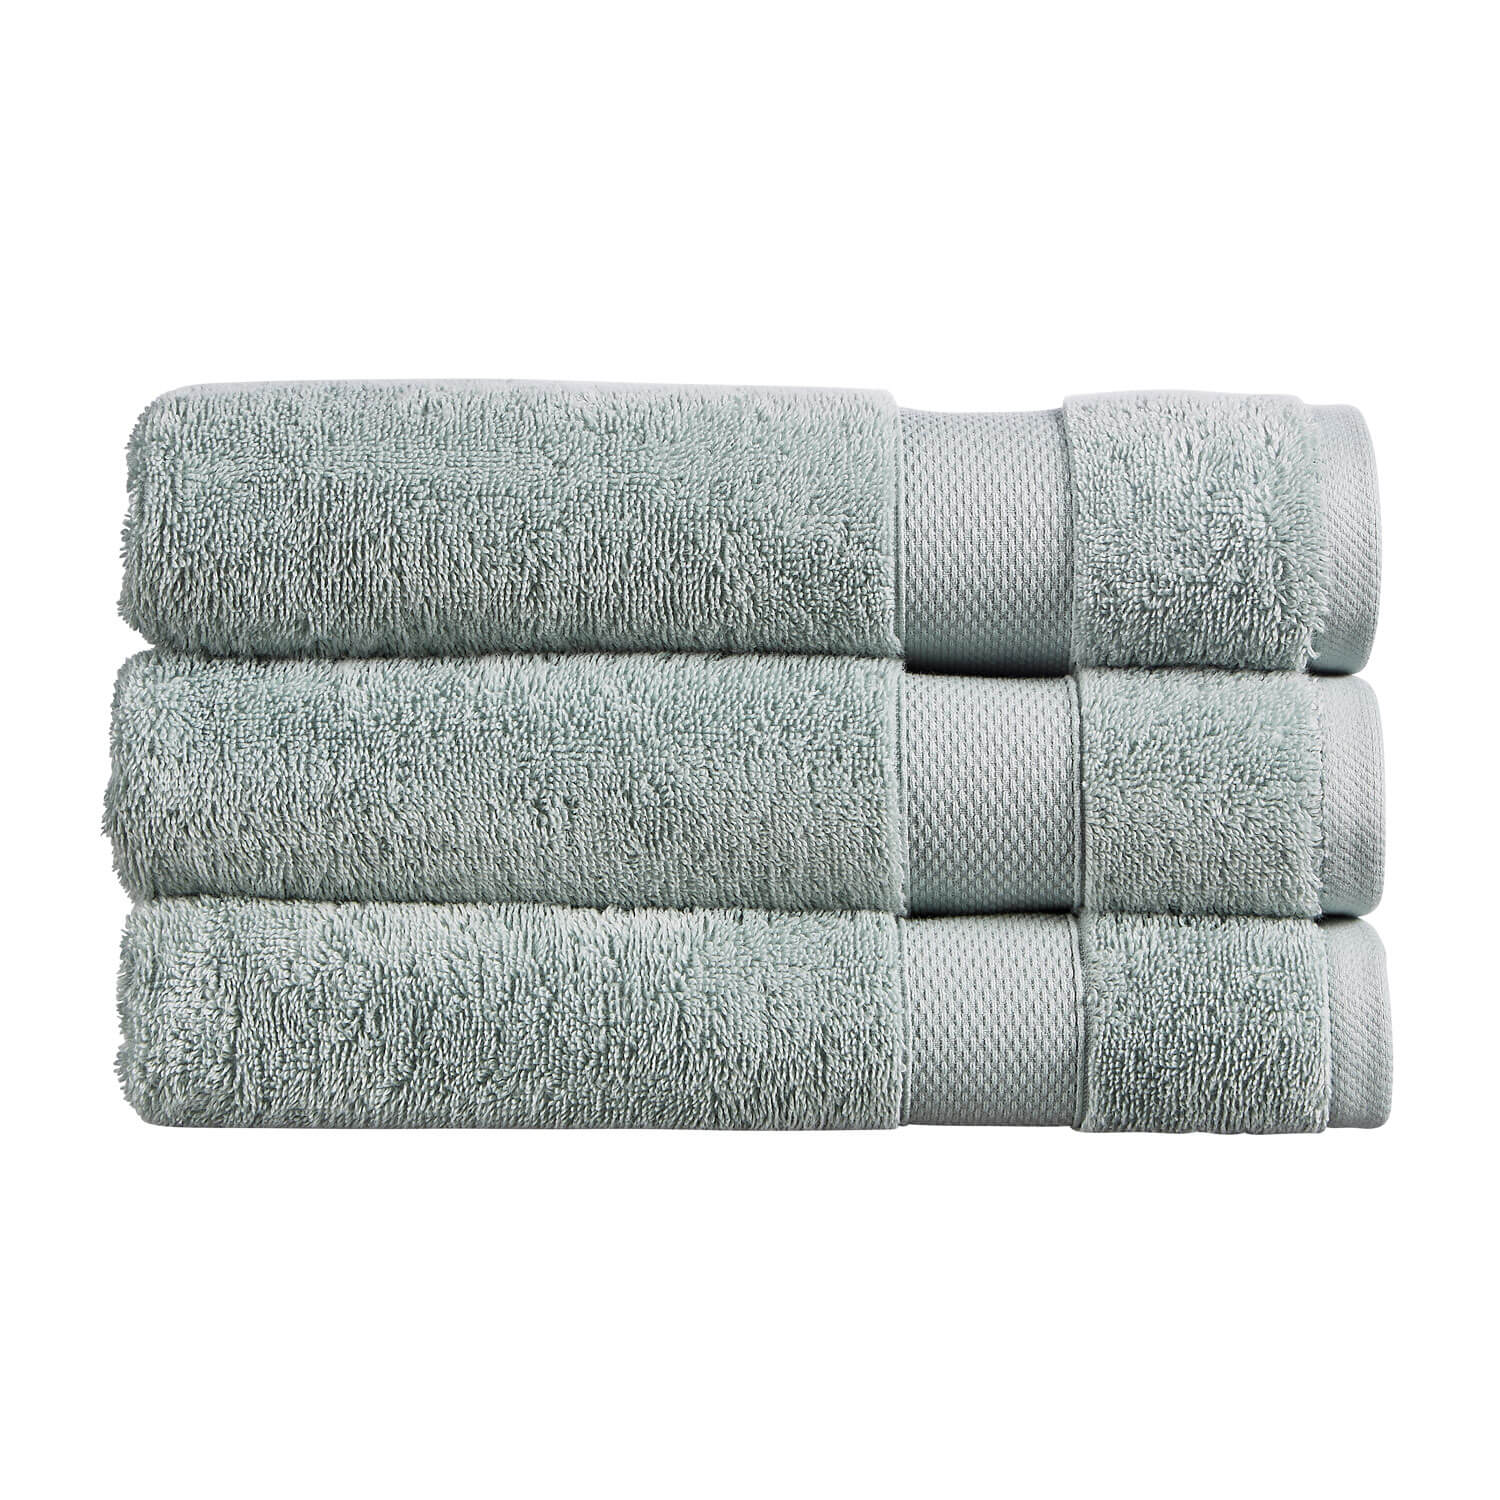 Christy Refresh Towels - Duck Egg 1 Shaws Department Stores